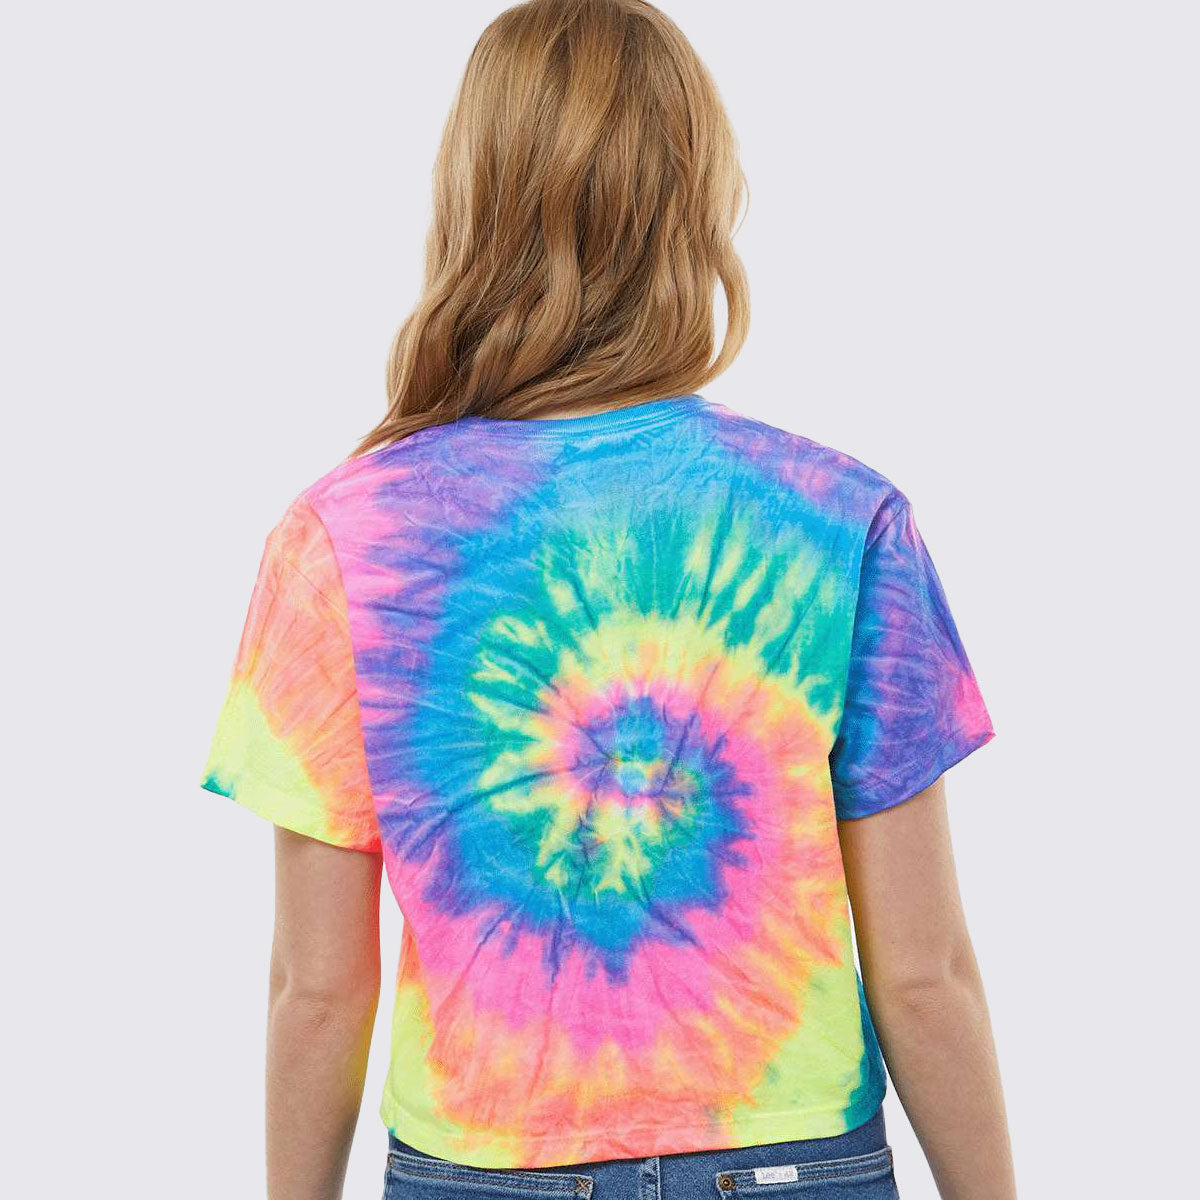 Strong Mother Women’s Tie-Dyed Crop T-Shirt